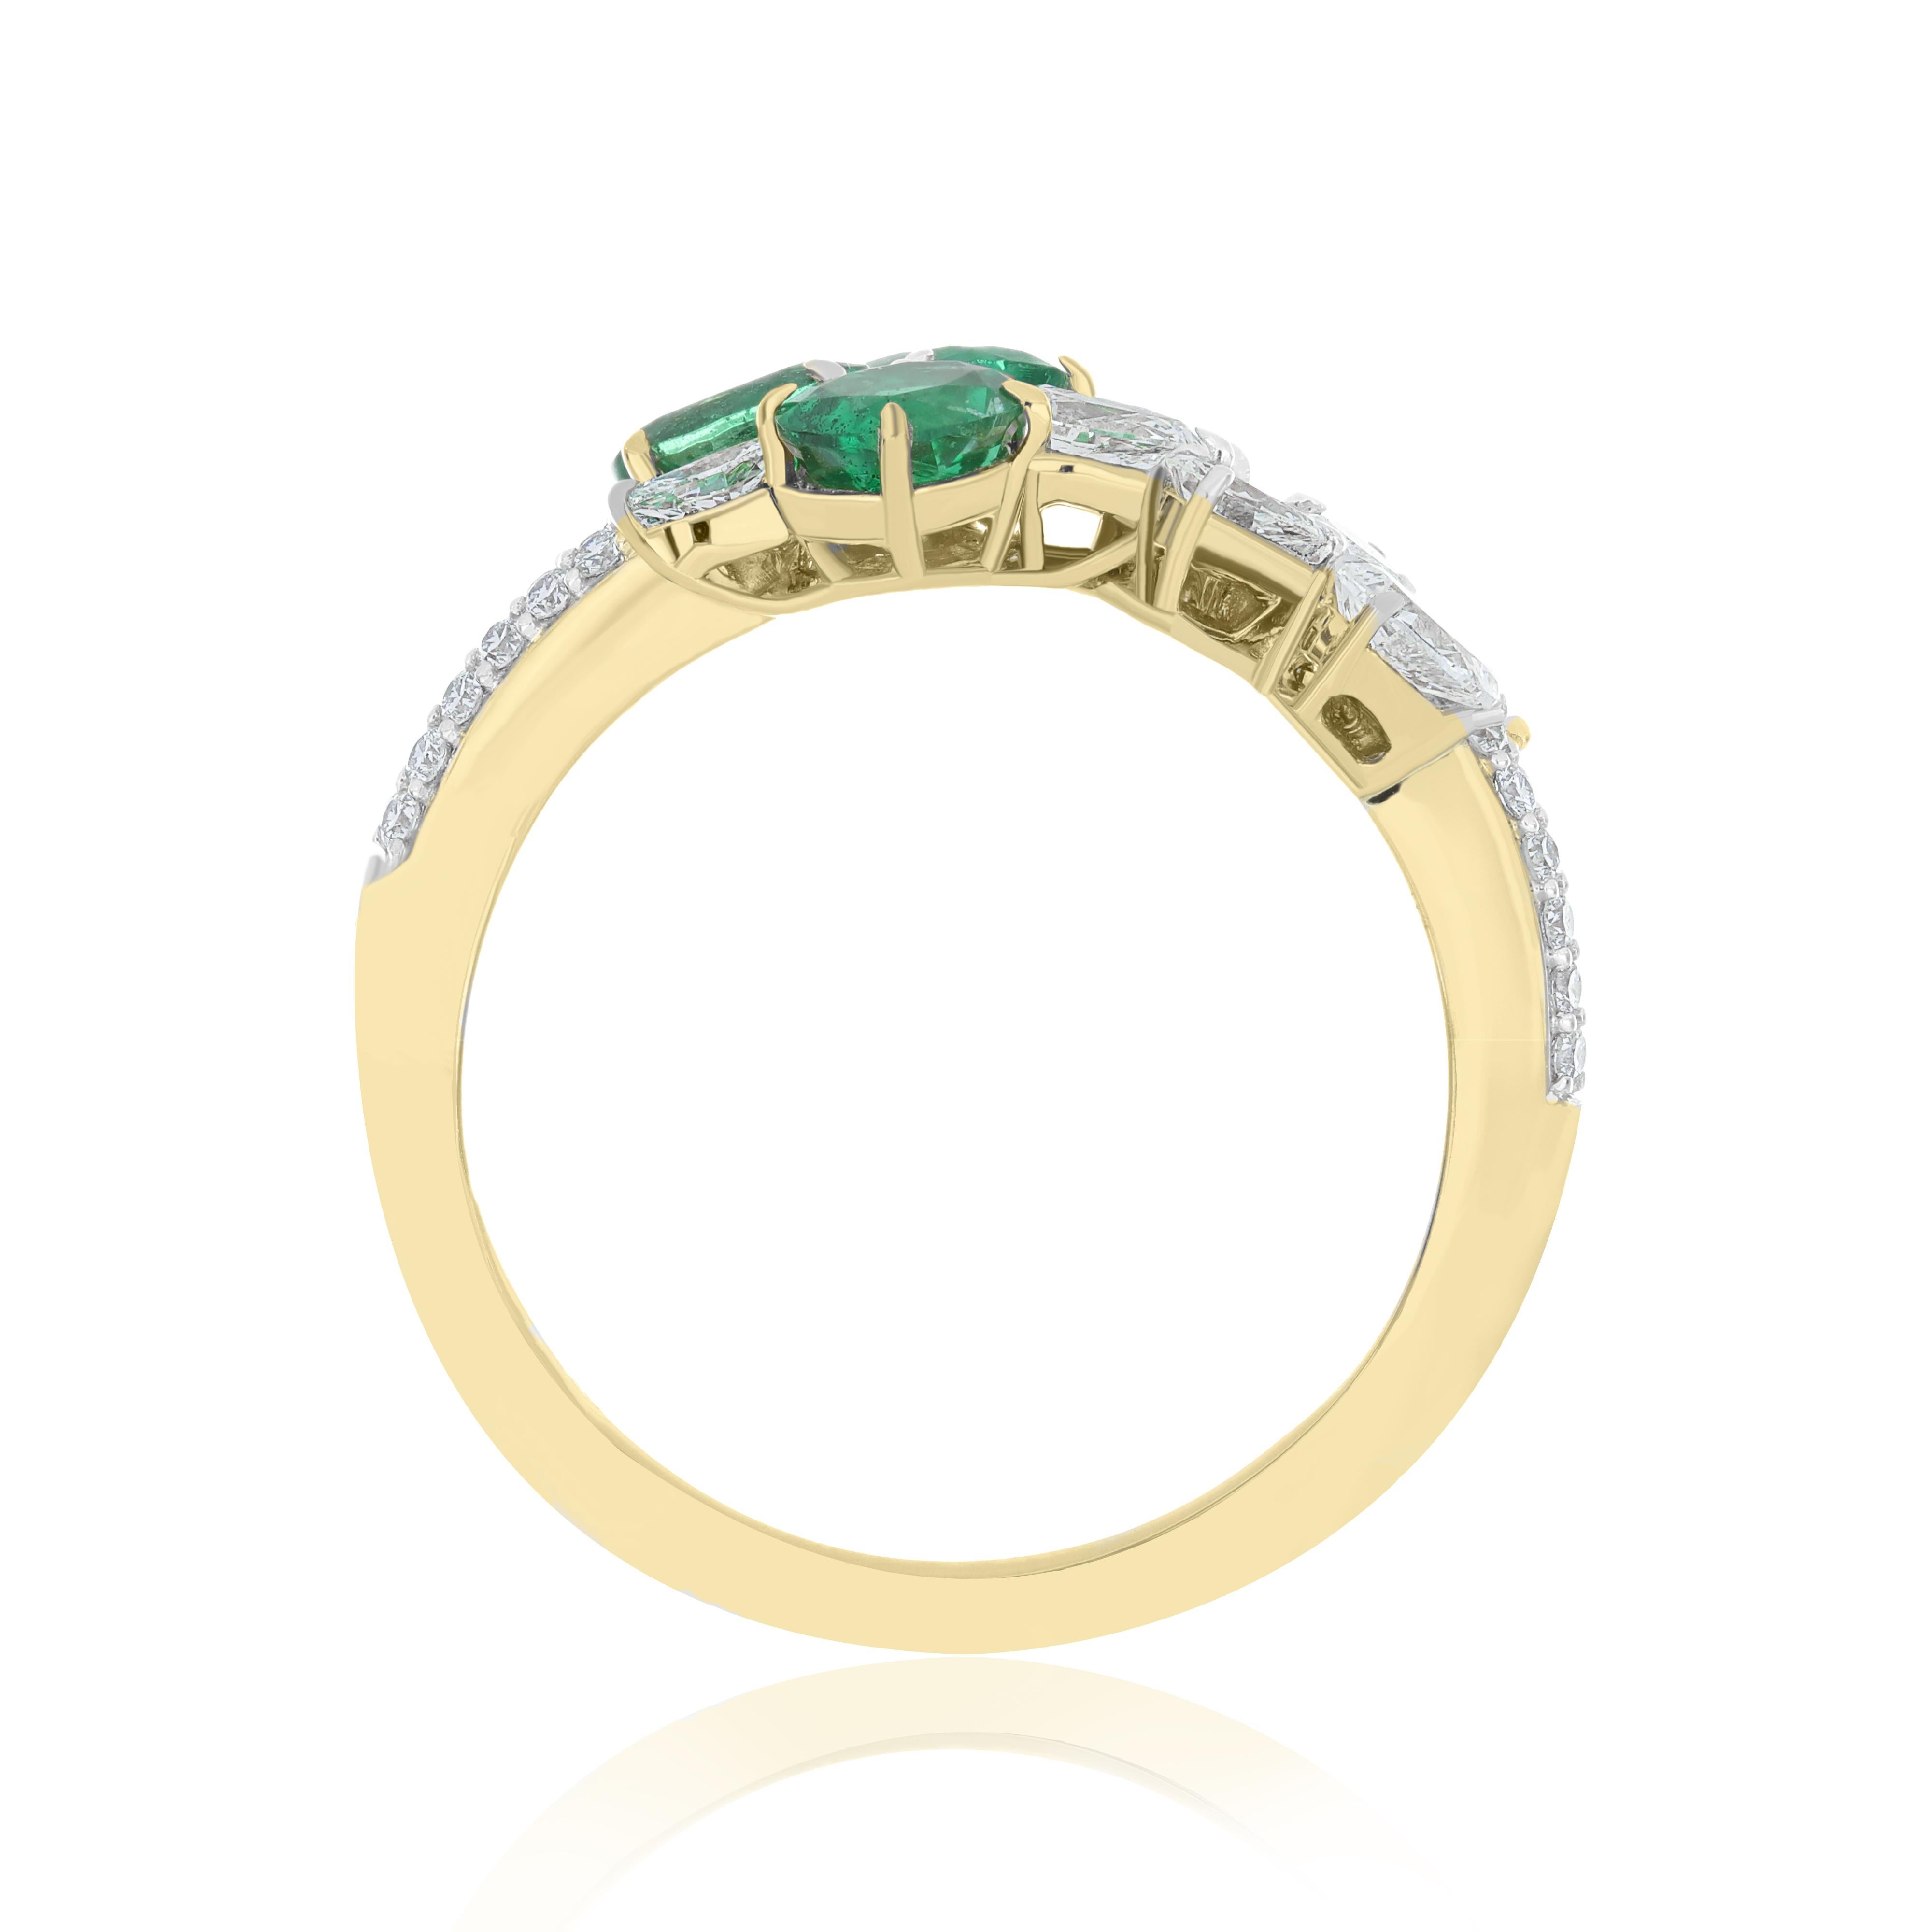 For Sale:  Emerald And Diamond Ring 18K White Gold handcraft Jewelry For Anniversary Gift 5